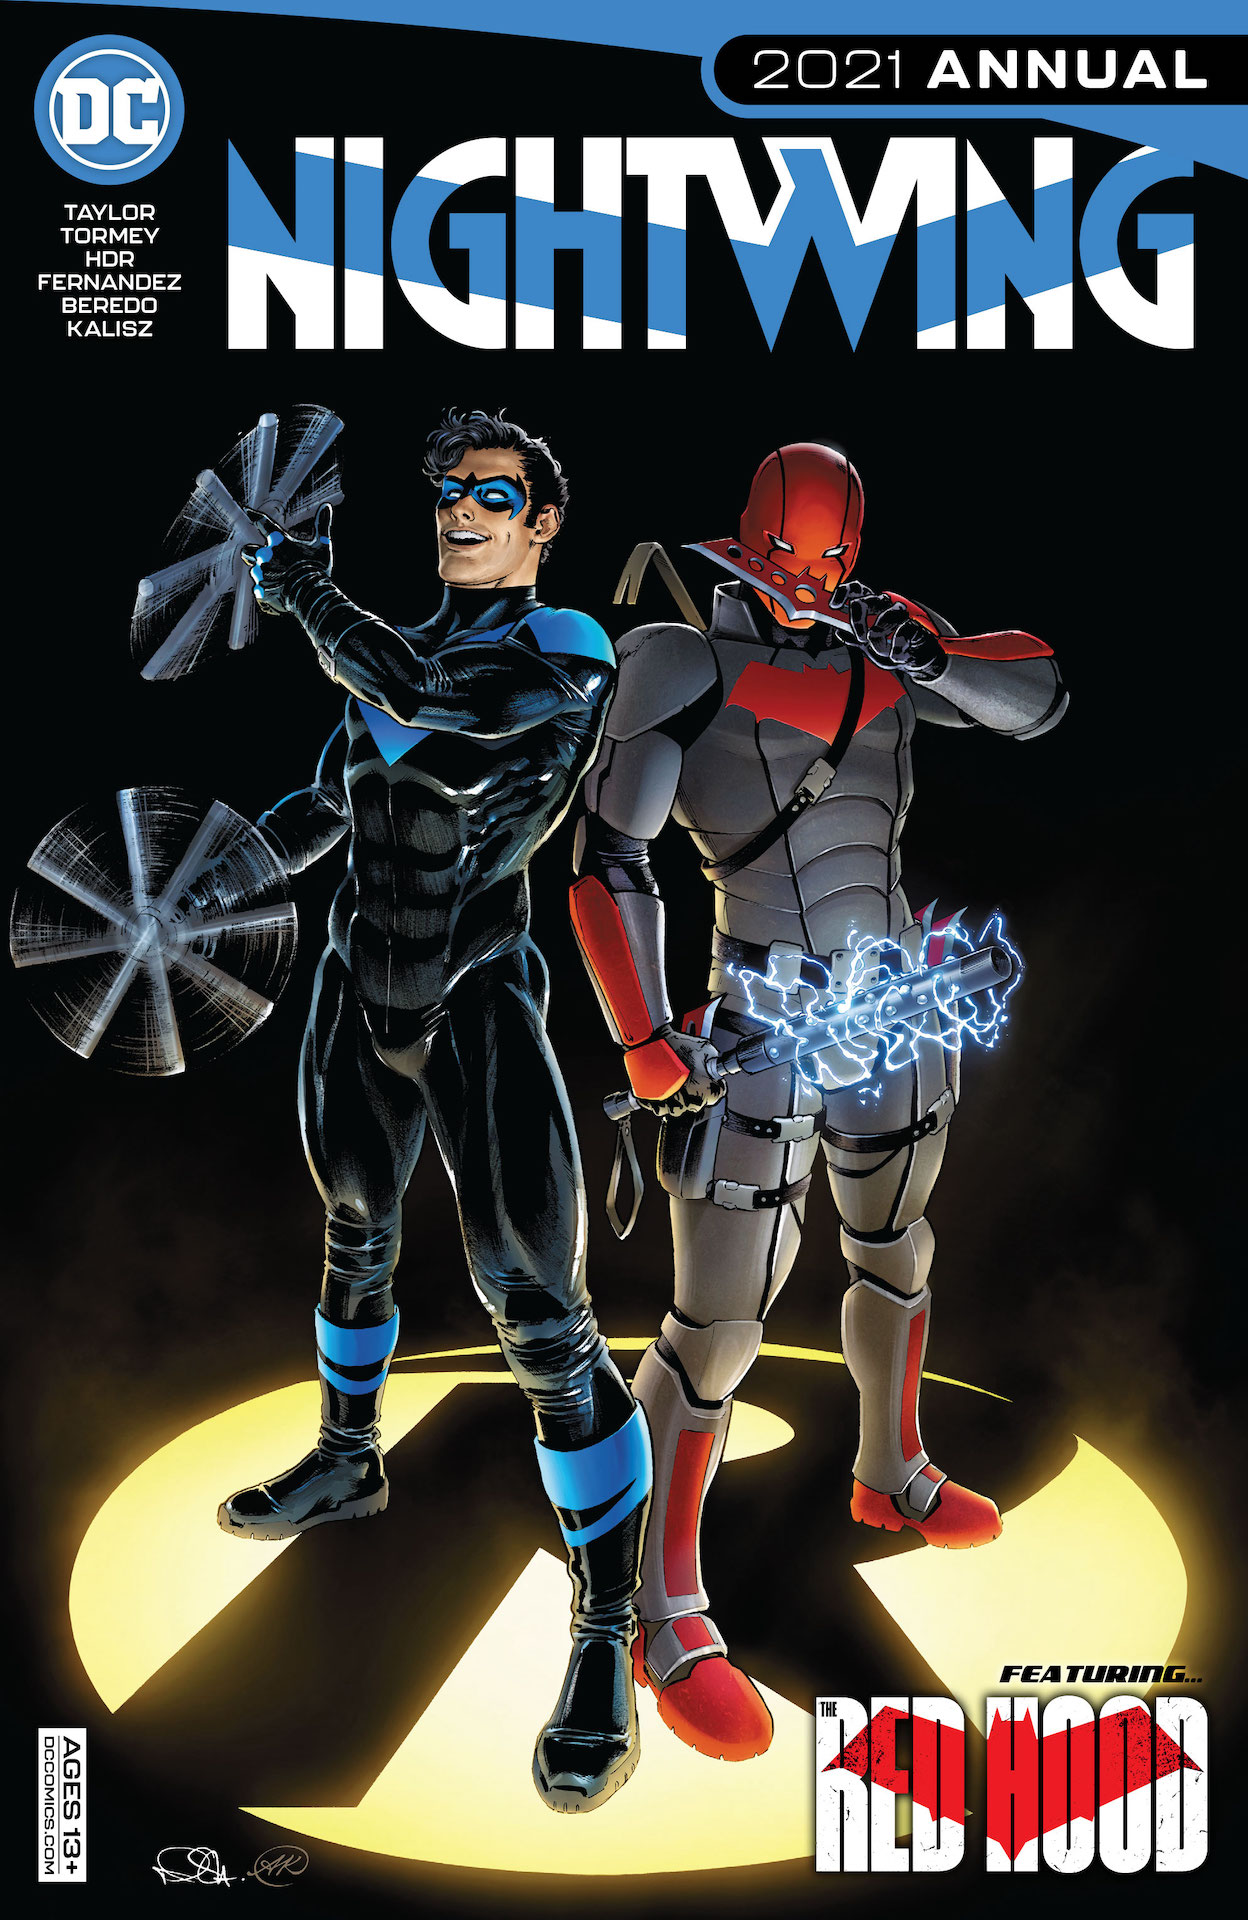 DC Preview: Nightwing Annual #1